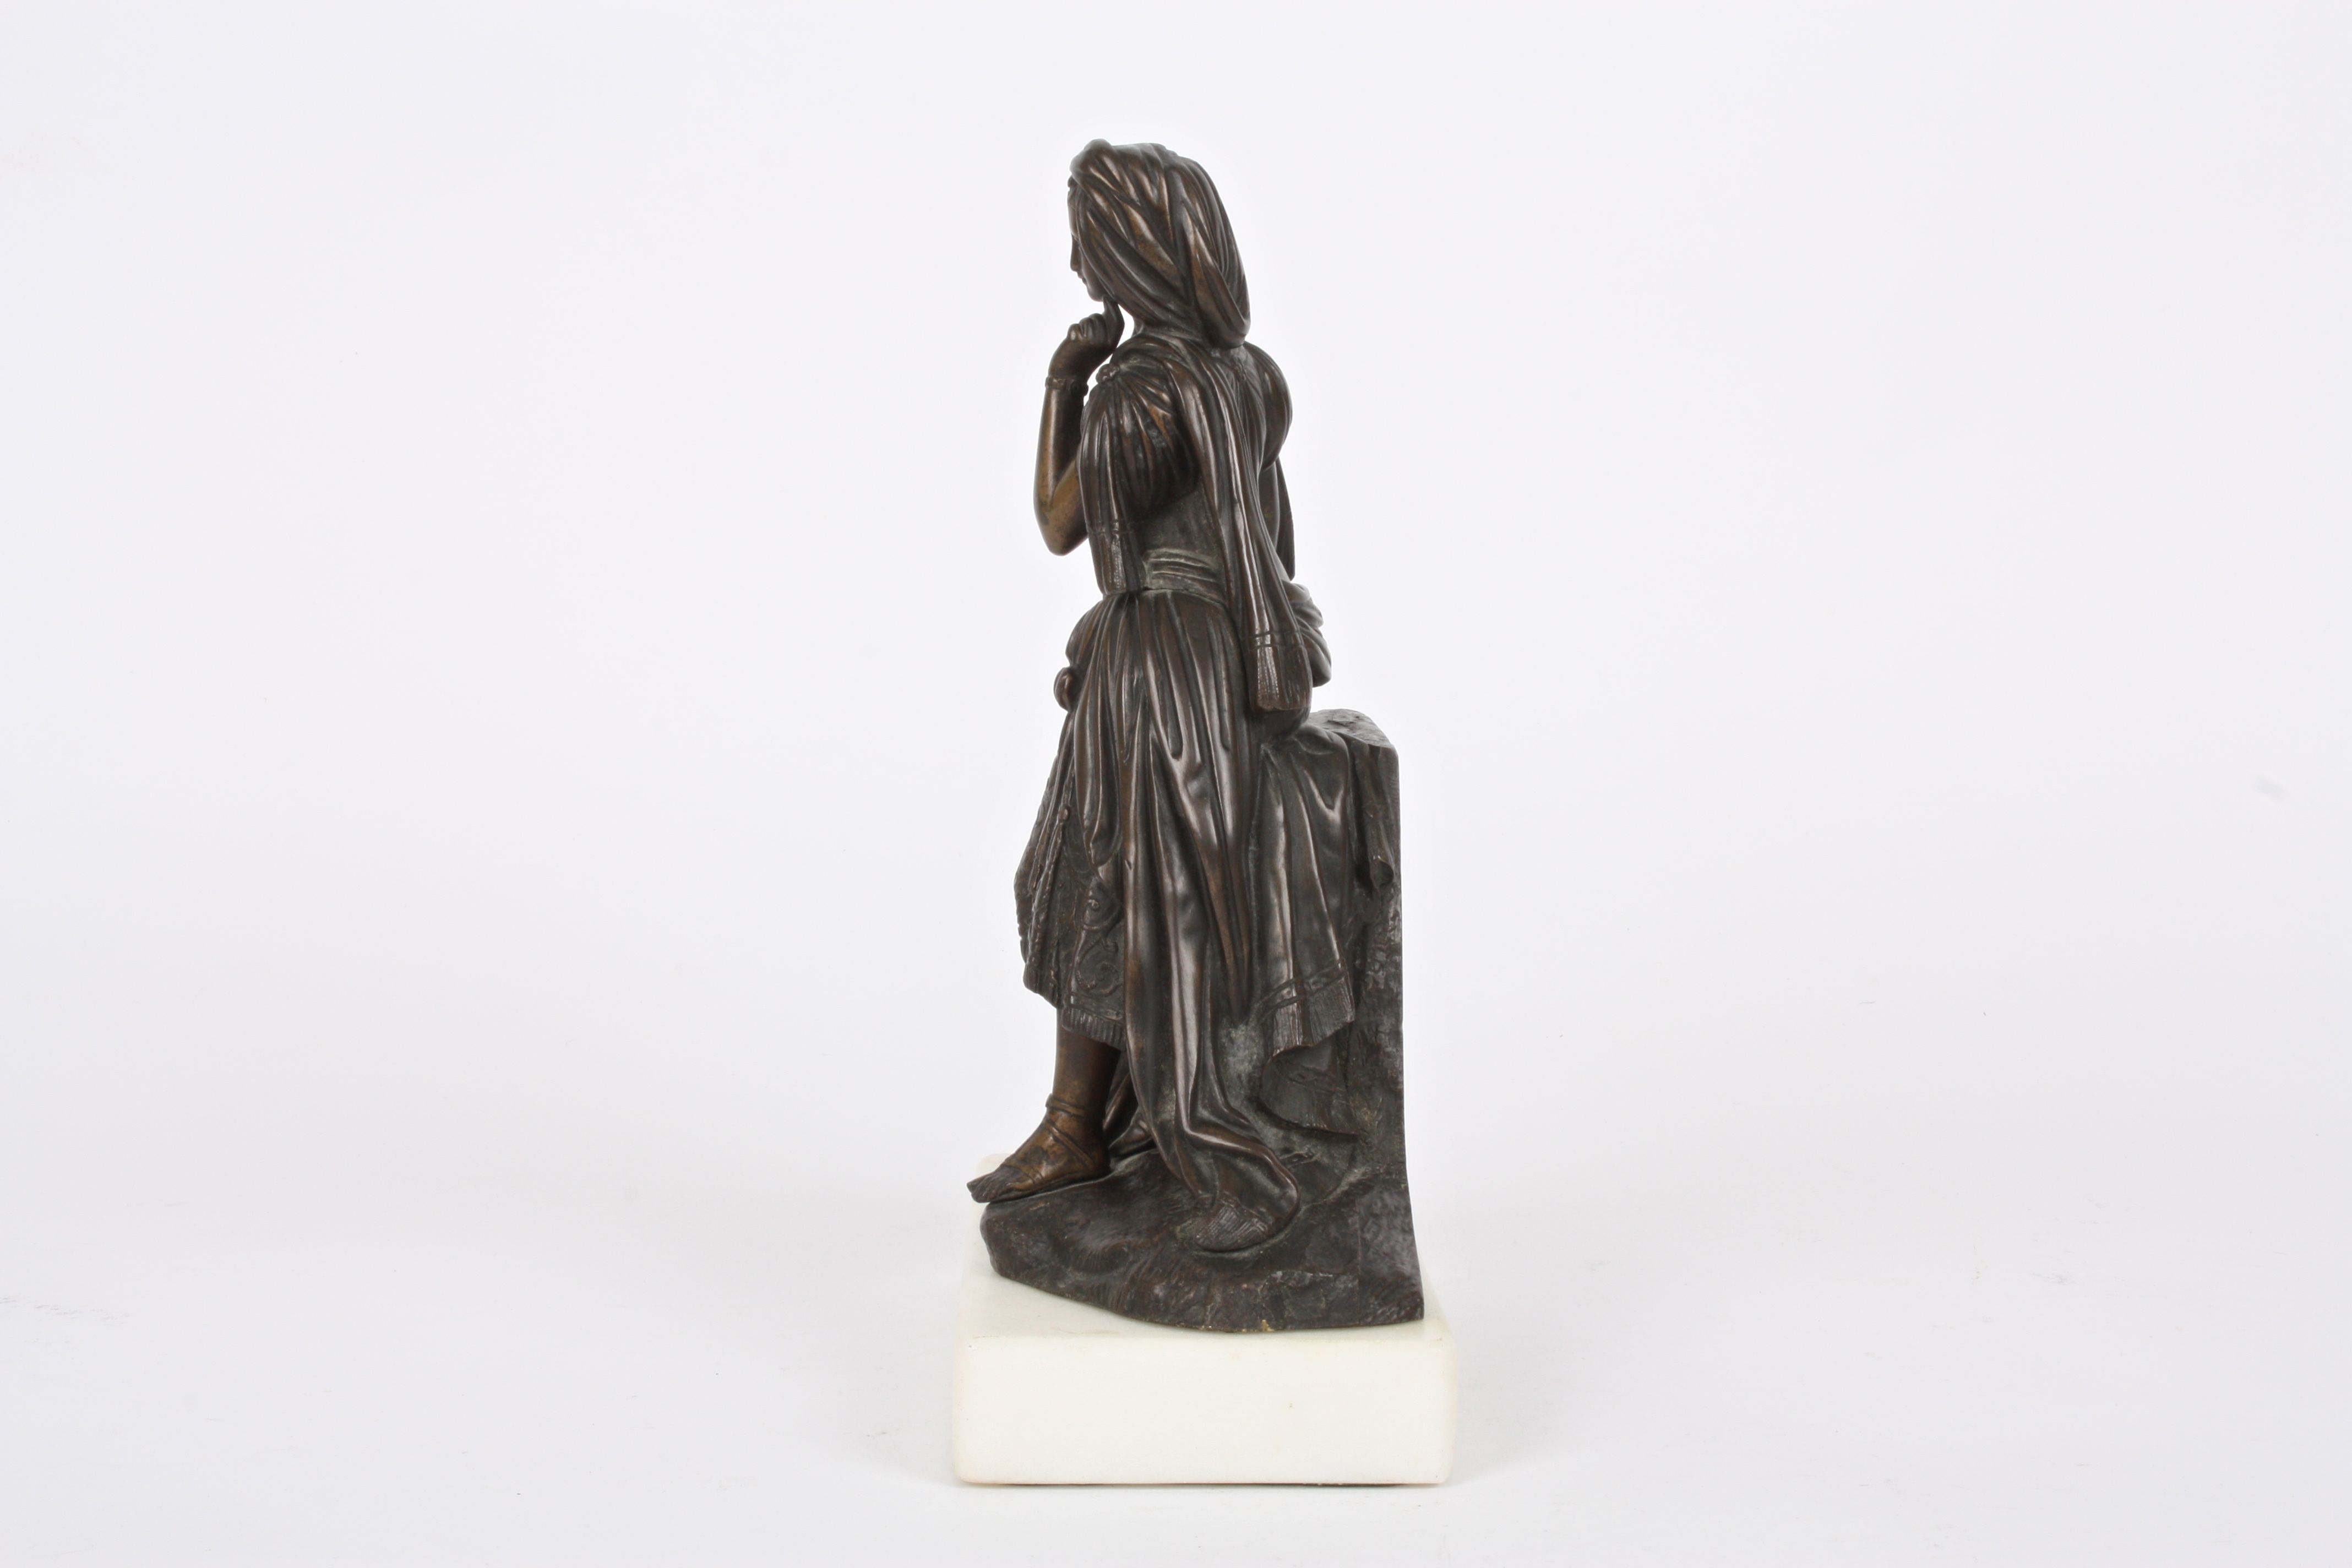 A 19th Century French bronze girl
stood wearing flowing robes stood beside a rocky pedestal and a - Image 2 of 4